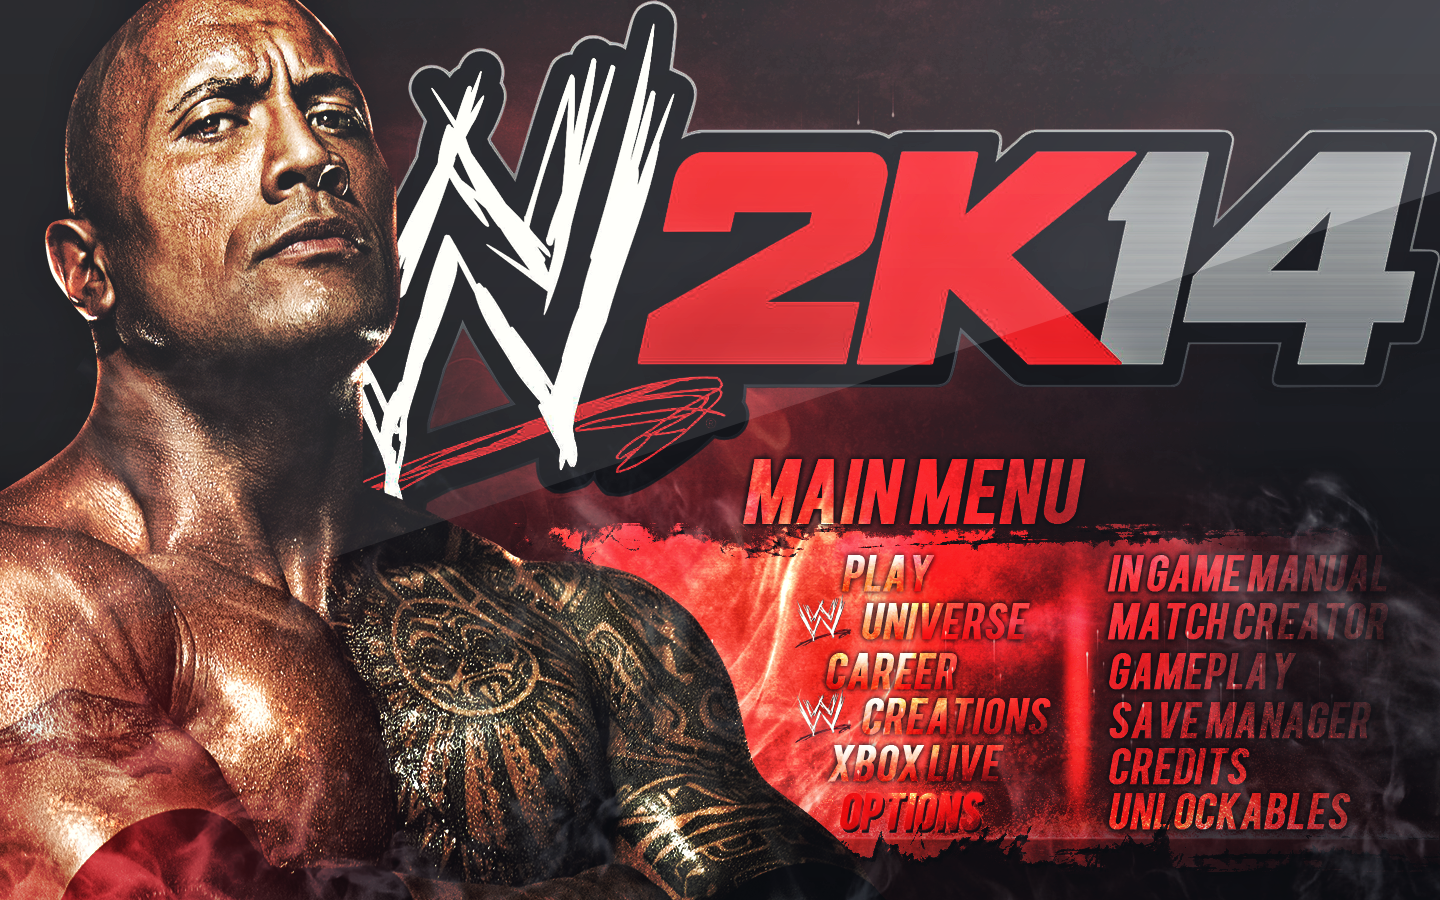 Wwe 2k14 For Ppsspp Iso.